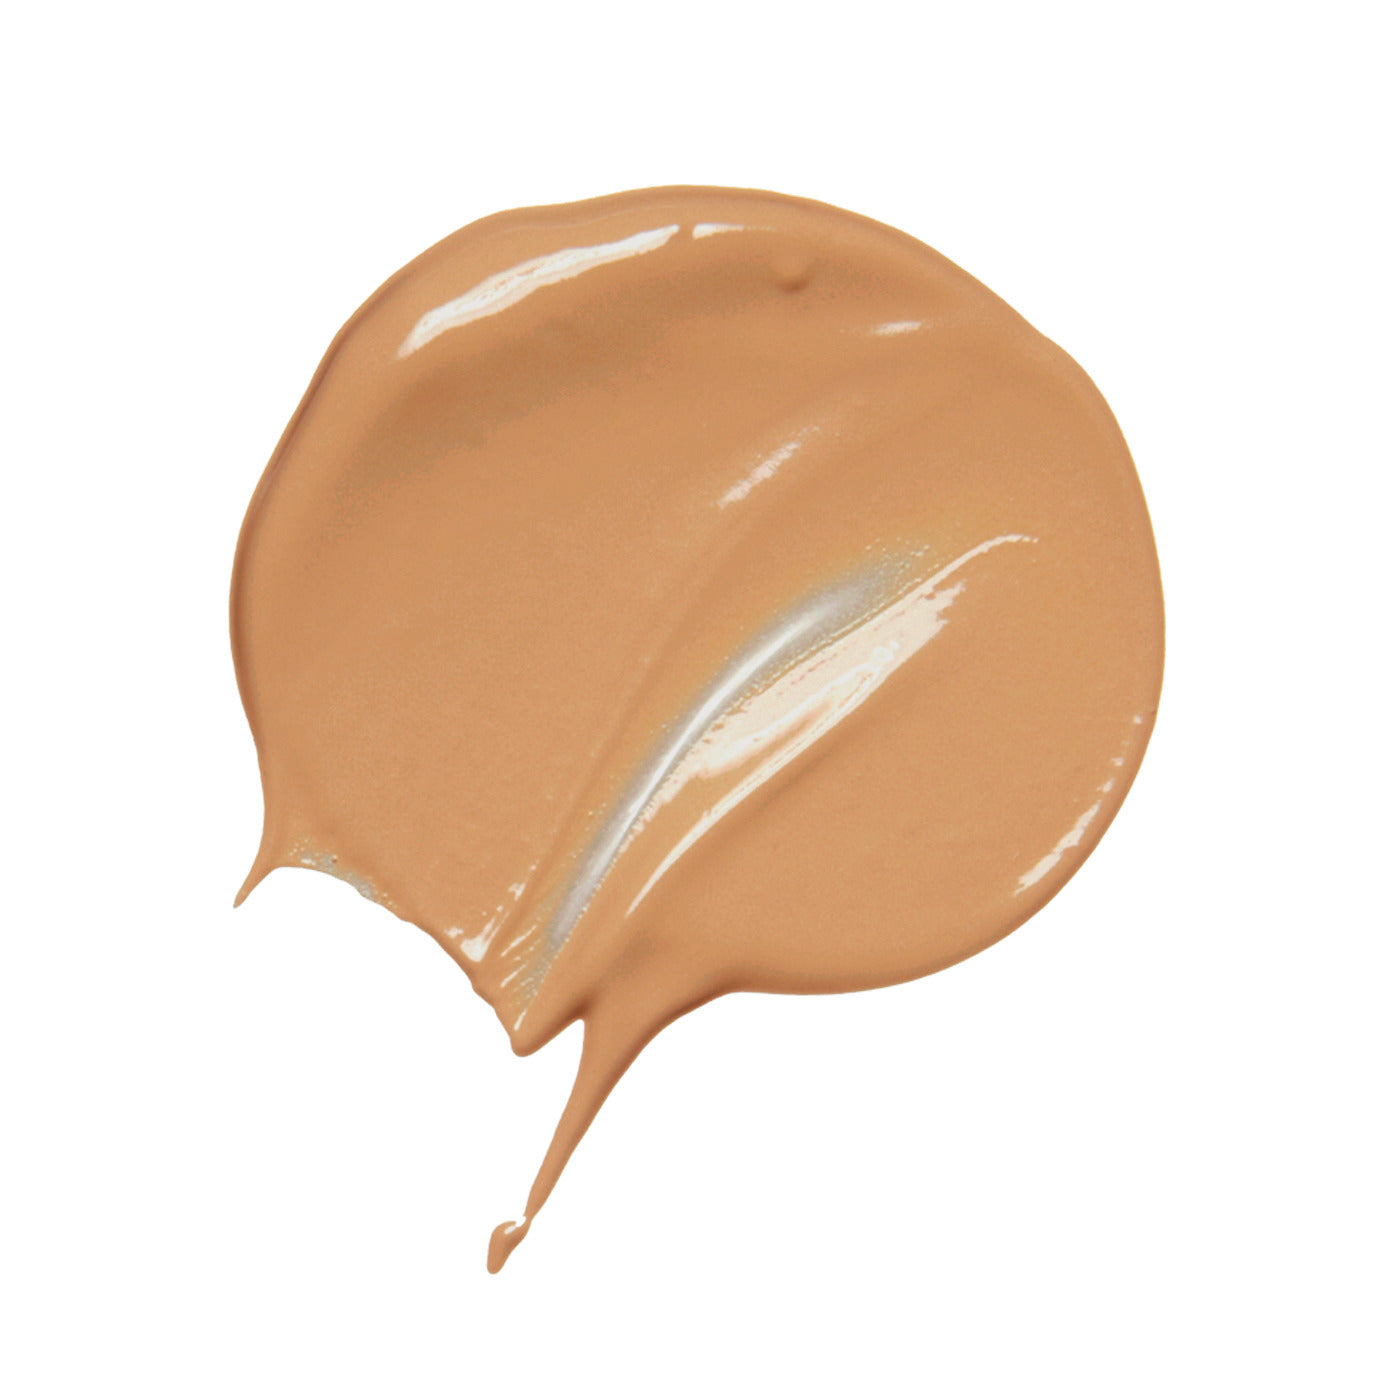 Extra-Firming Foundation